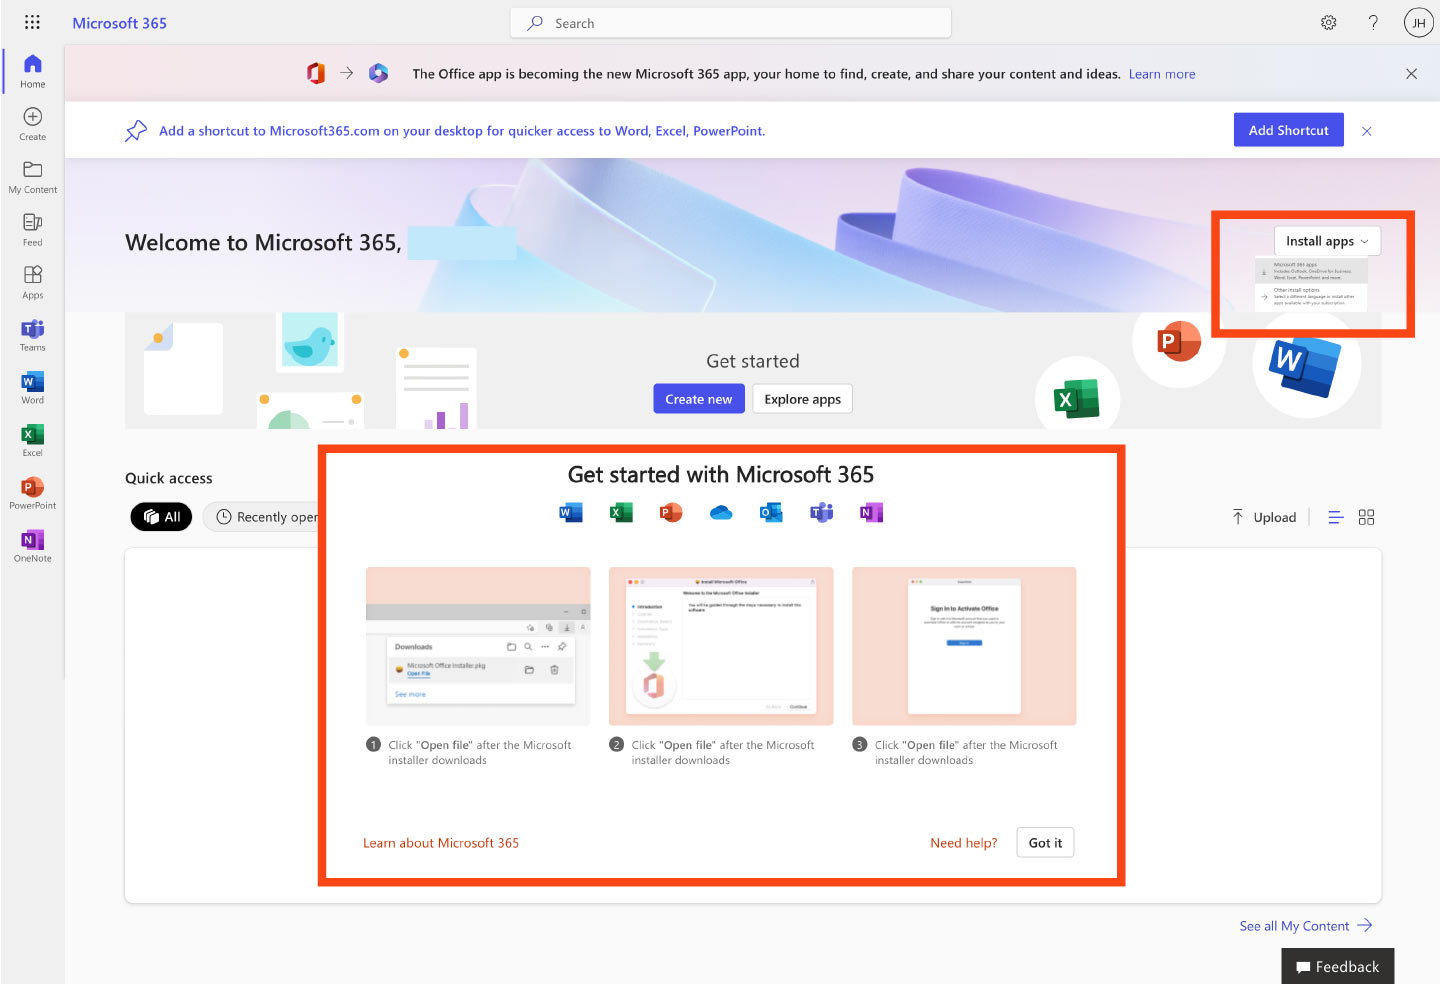 Screenshot of Microsoft Office 365 dashboard showing an orange box around the "Install apps" button and an orange box around the download instruction popup